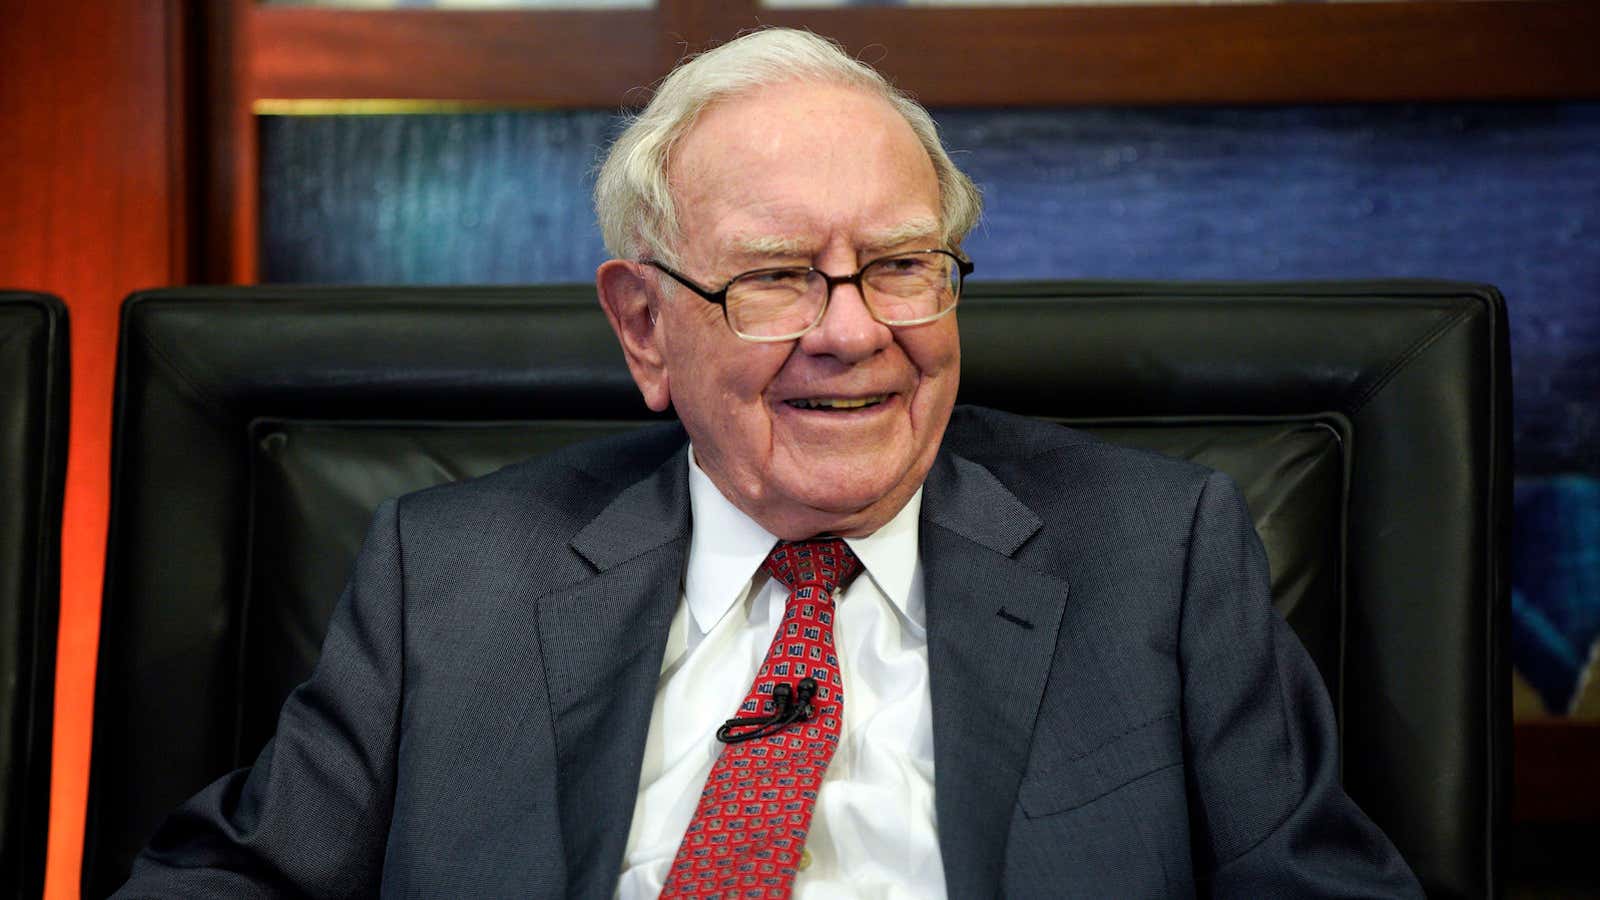 Even if you don’t have millions at your disposal, you can still benefit from Buffett’s wisdom.